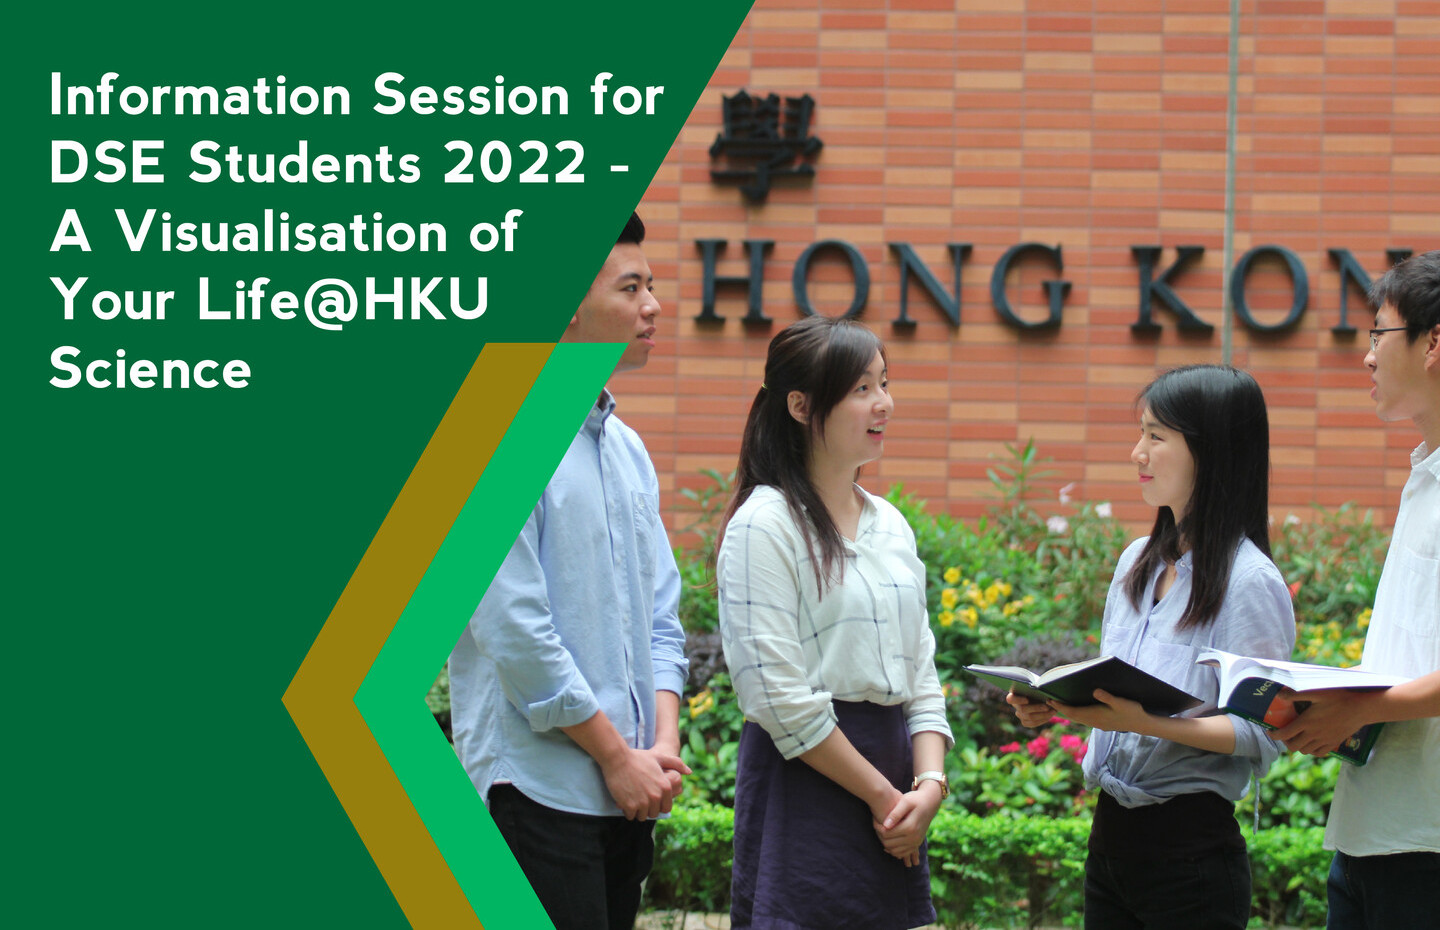 Information Session for DSE Students 2022 - A Visualisation of Your Life@HKU Science